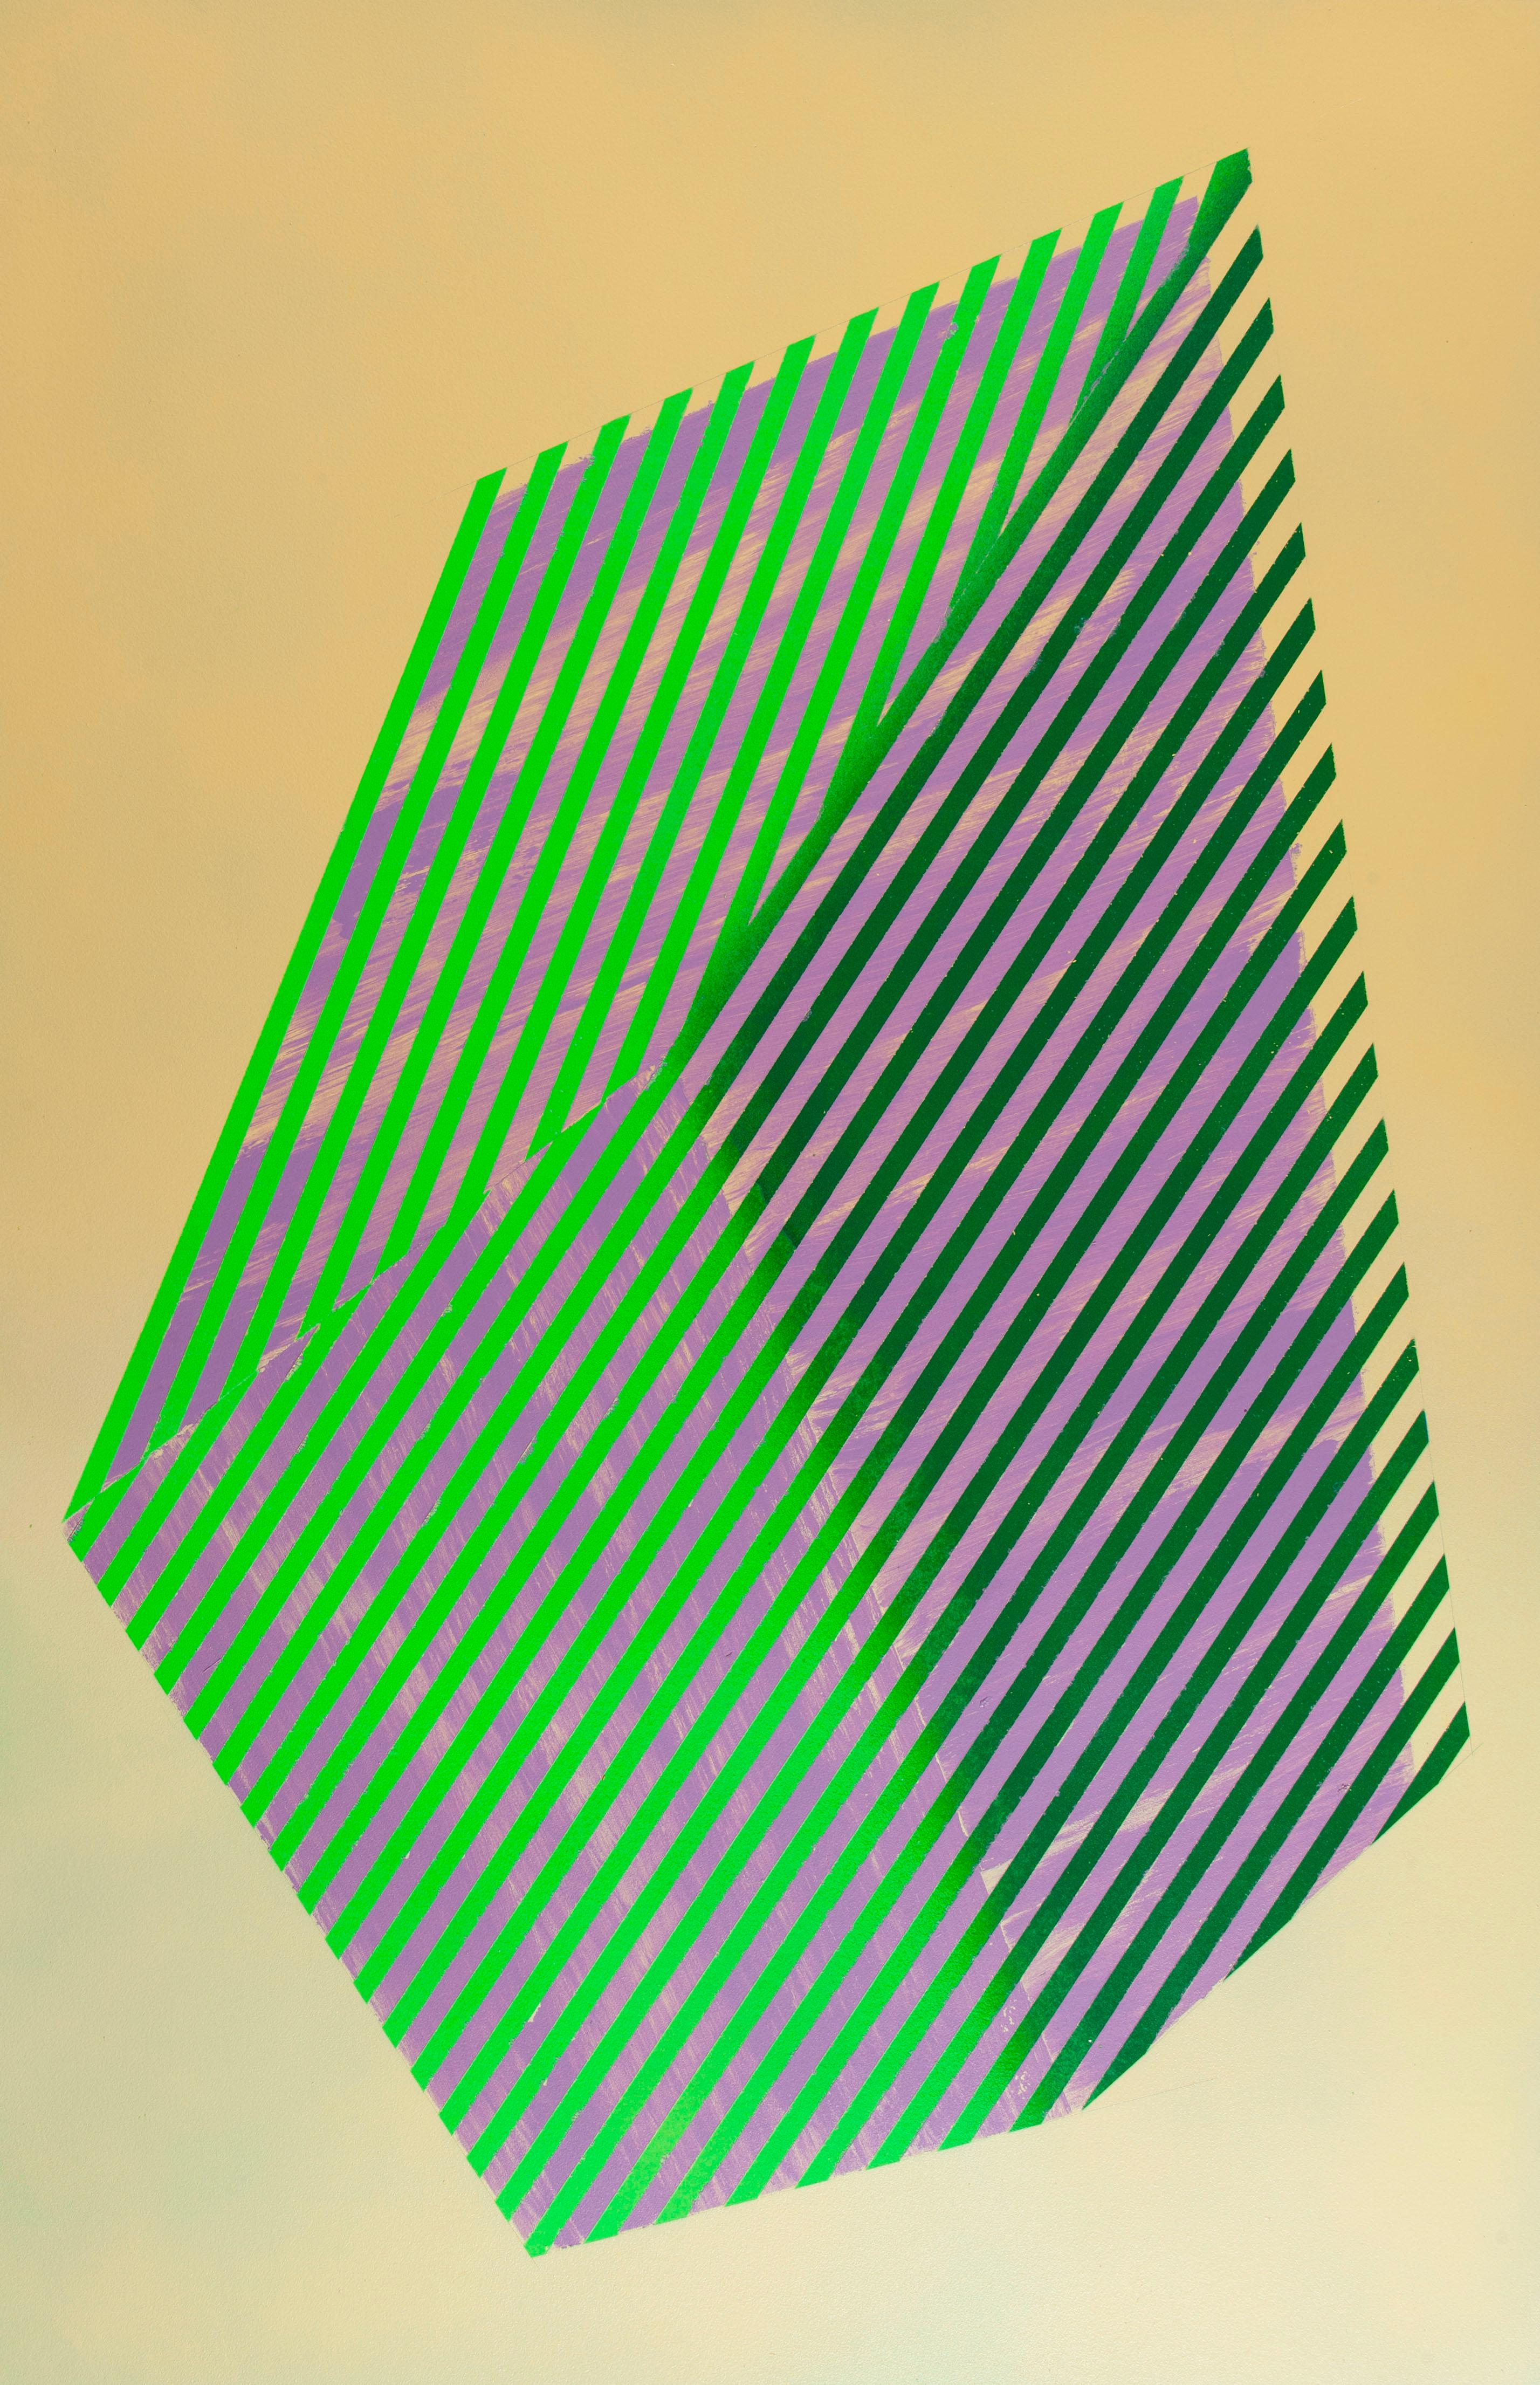 Prismatic Polygon XVII: geometric abstract painting in green, purple & gold